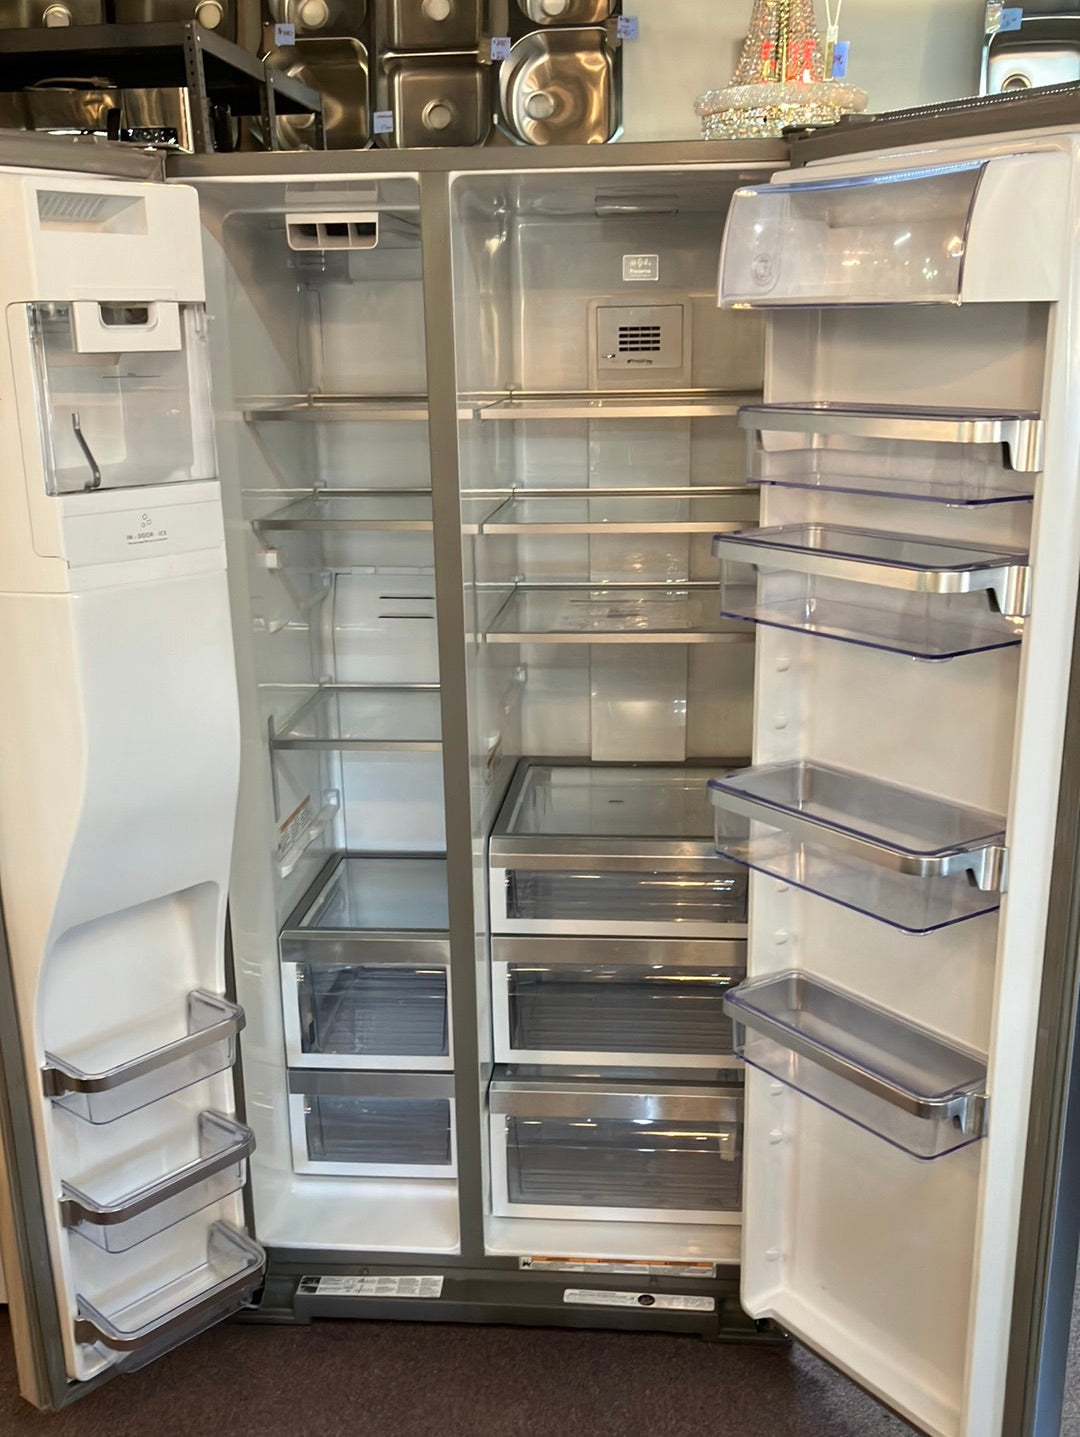 KitchenAid LOANER UNIT KRSF705HPS 36 Inch Side-by-Side Refrigerator with 24.8 cu. ft. Total Capacity STAINLESS STEEL